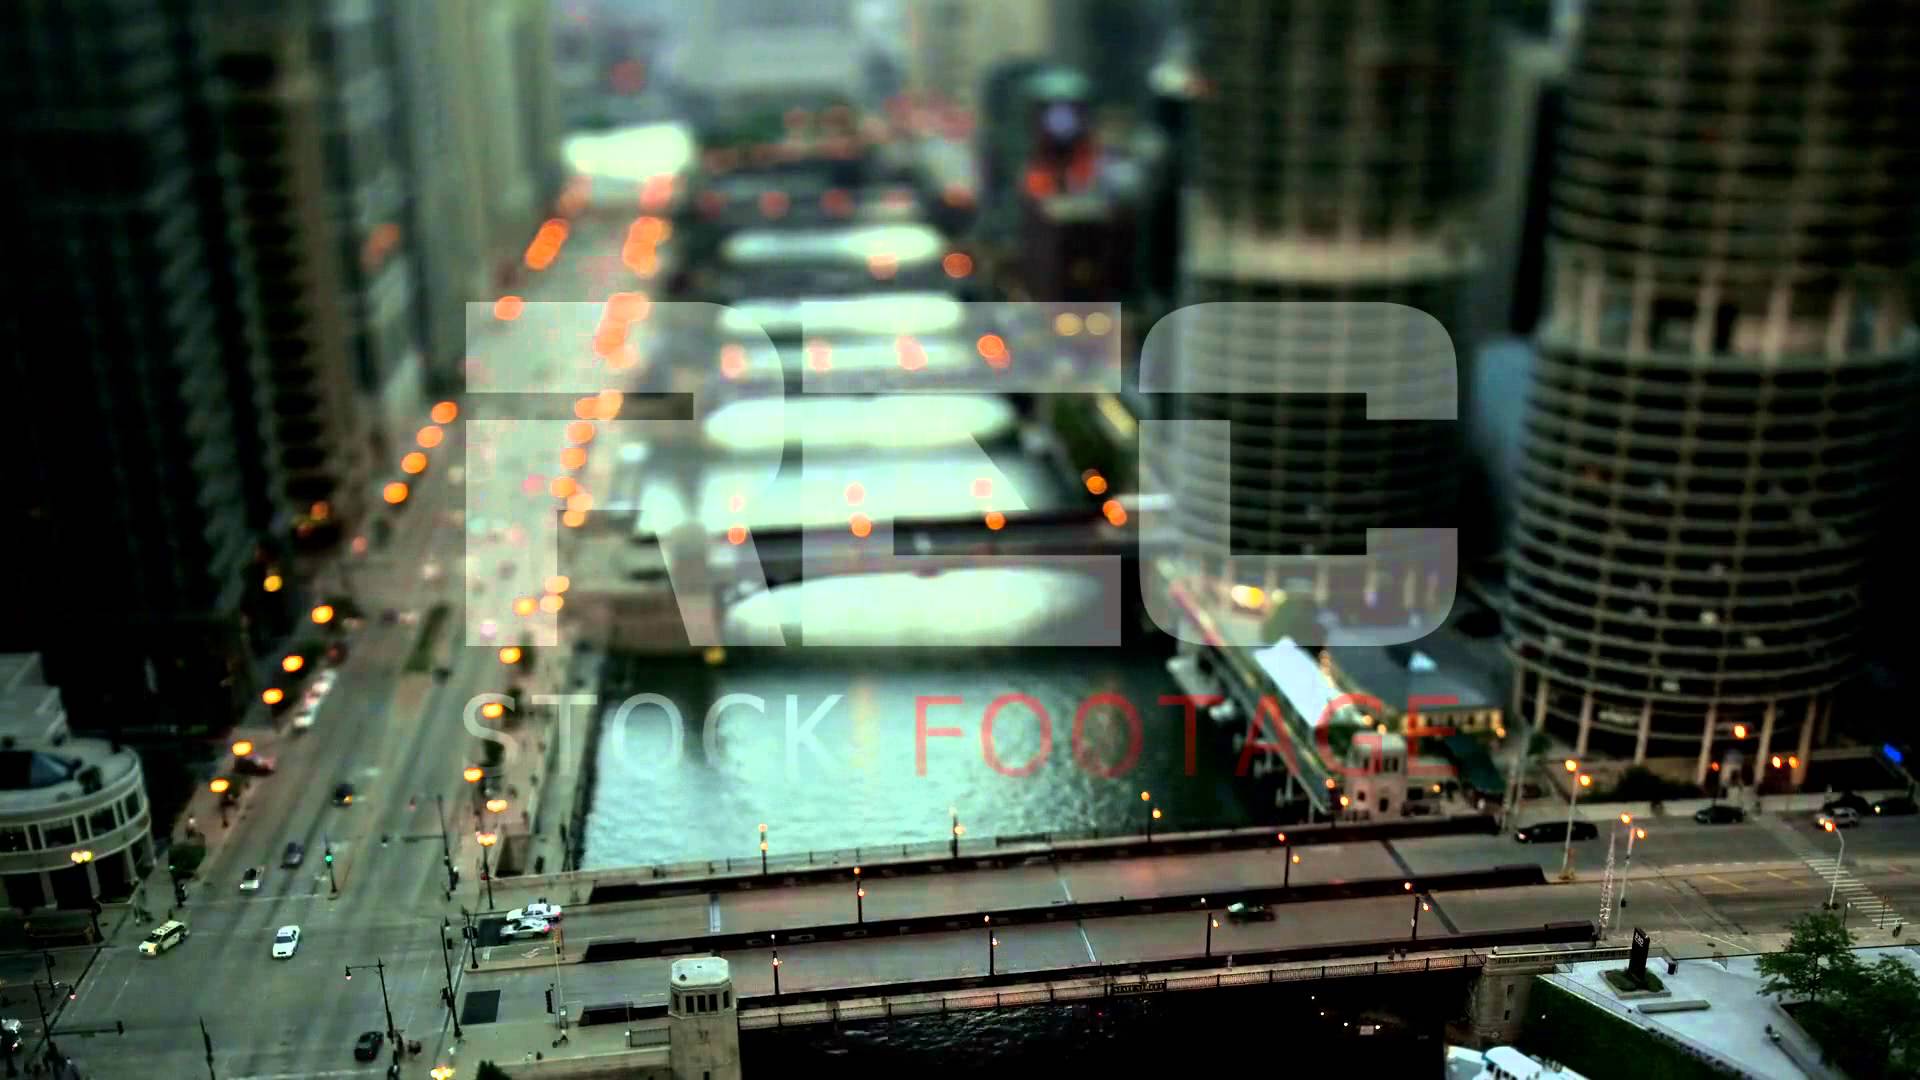 REC Stock Footage, Downtown Chicago river - Tilt shift. - YouTube